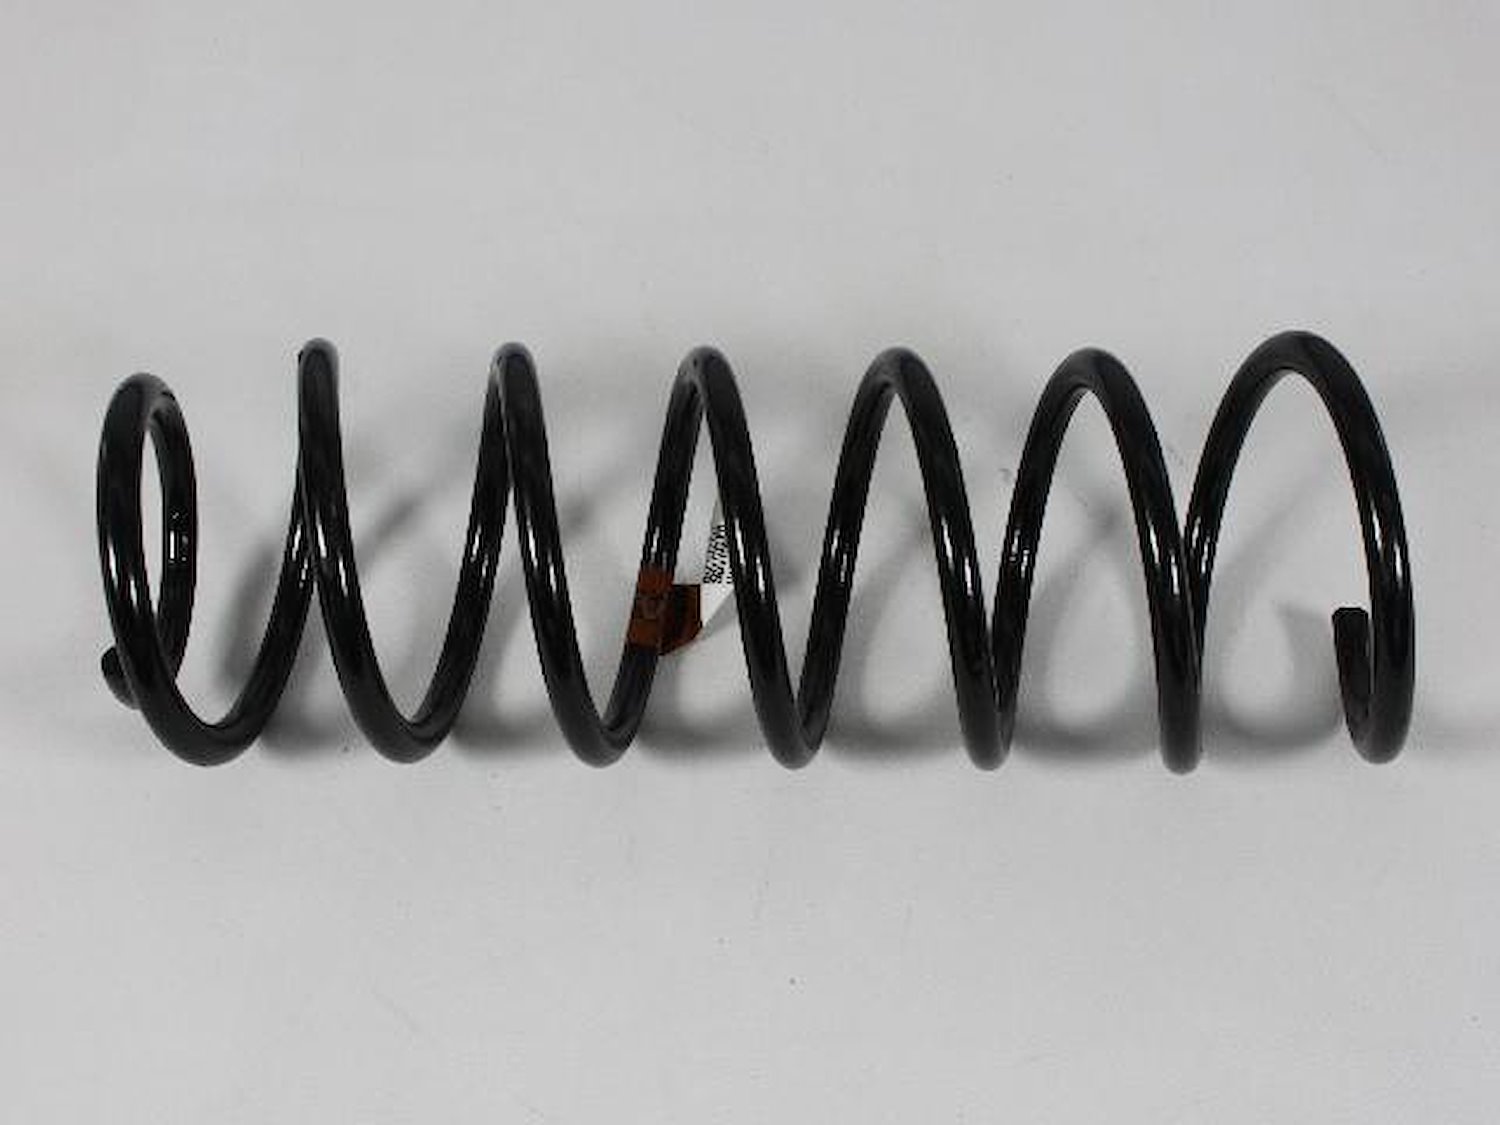 SPRING FRONT COIL